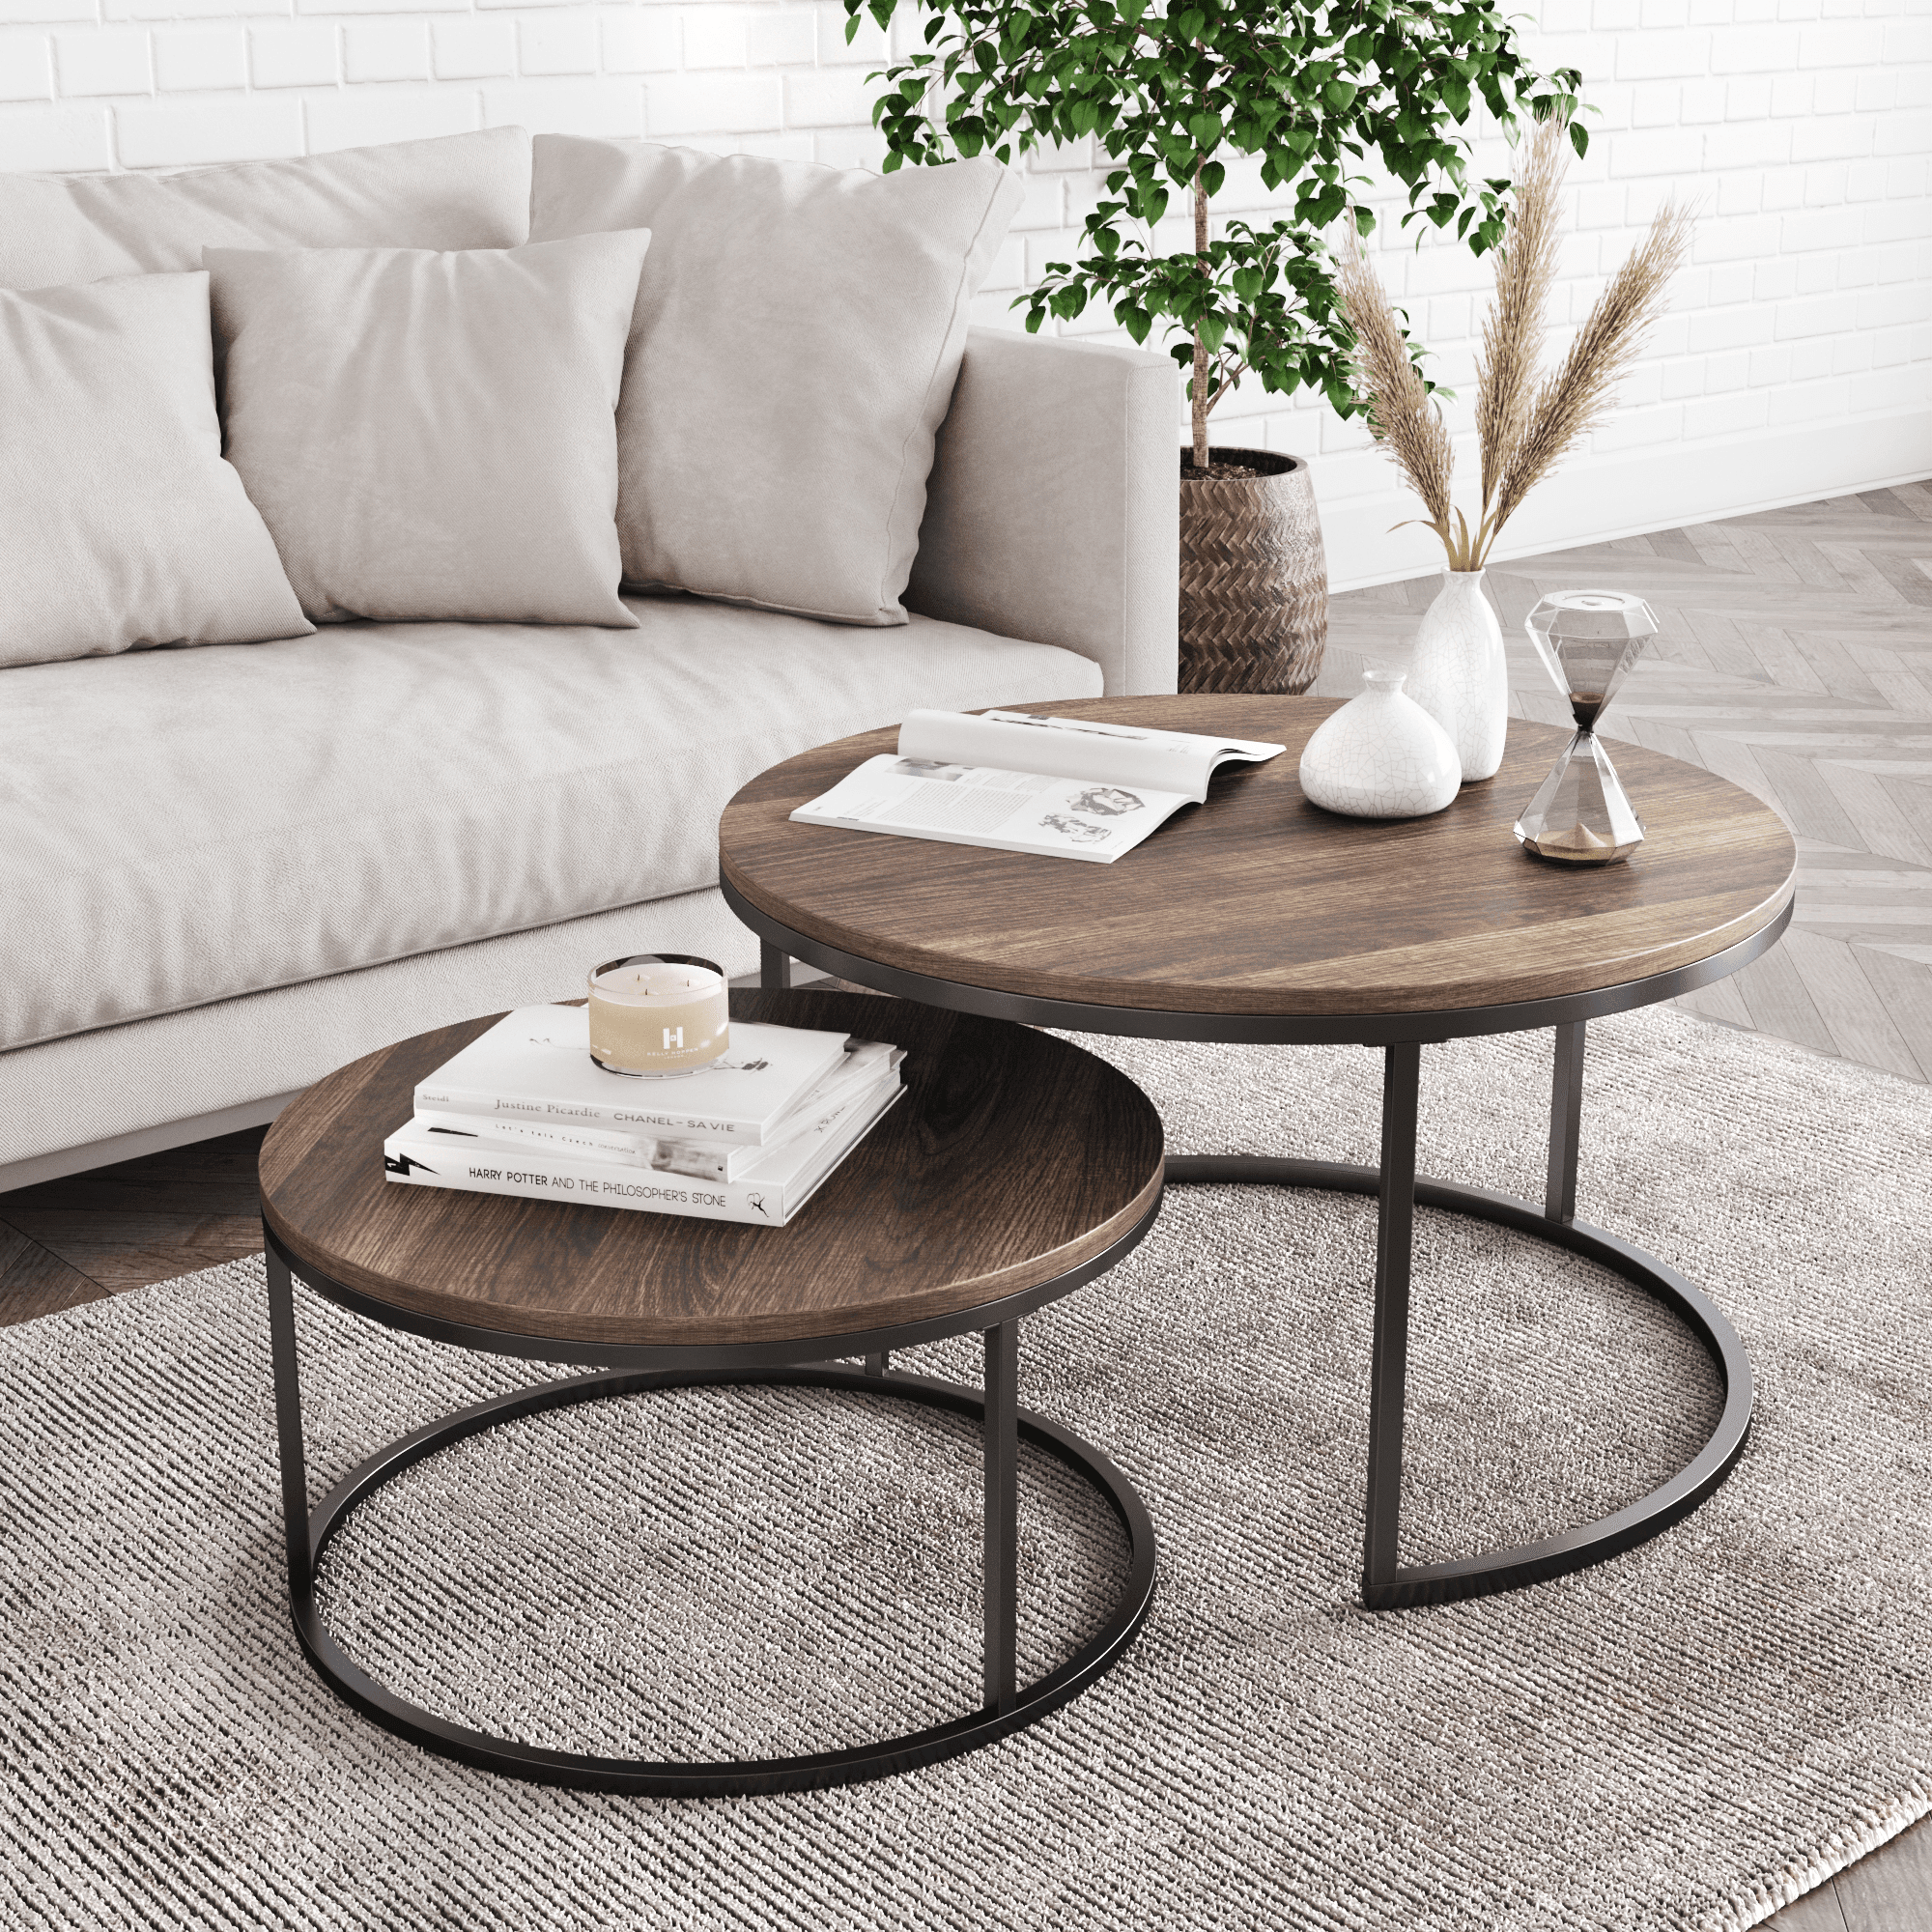 Stella Round Nesting Or Stacking Coffee Table Set Of 2 Wood Finish Intended For Round Coffee Tables (Gallery 14 of 20)